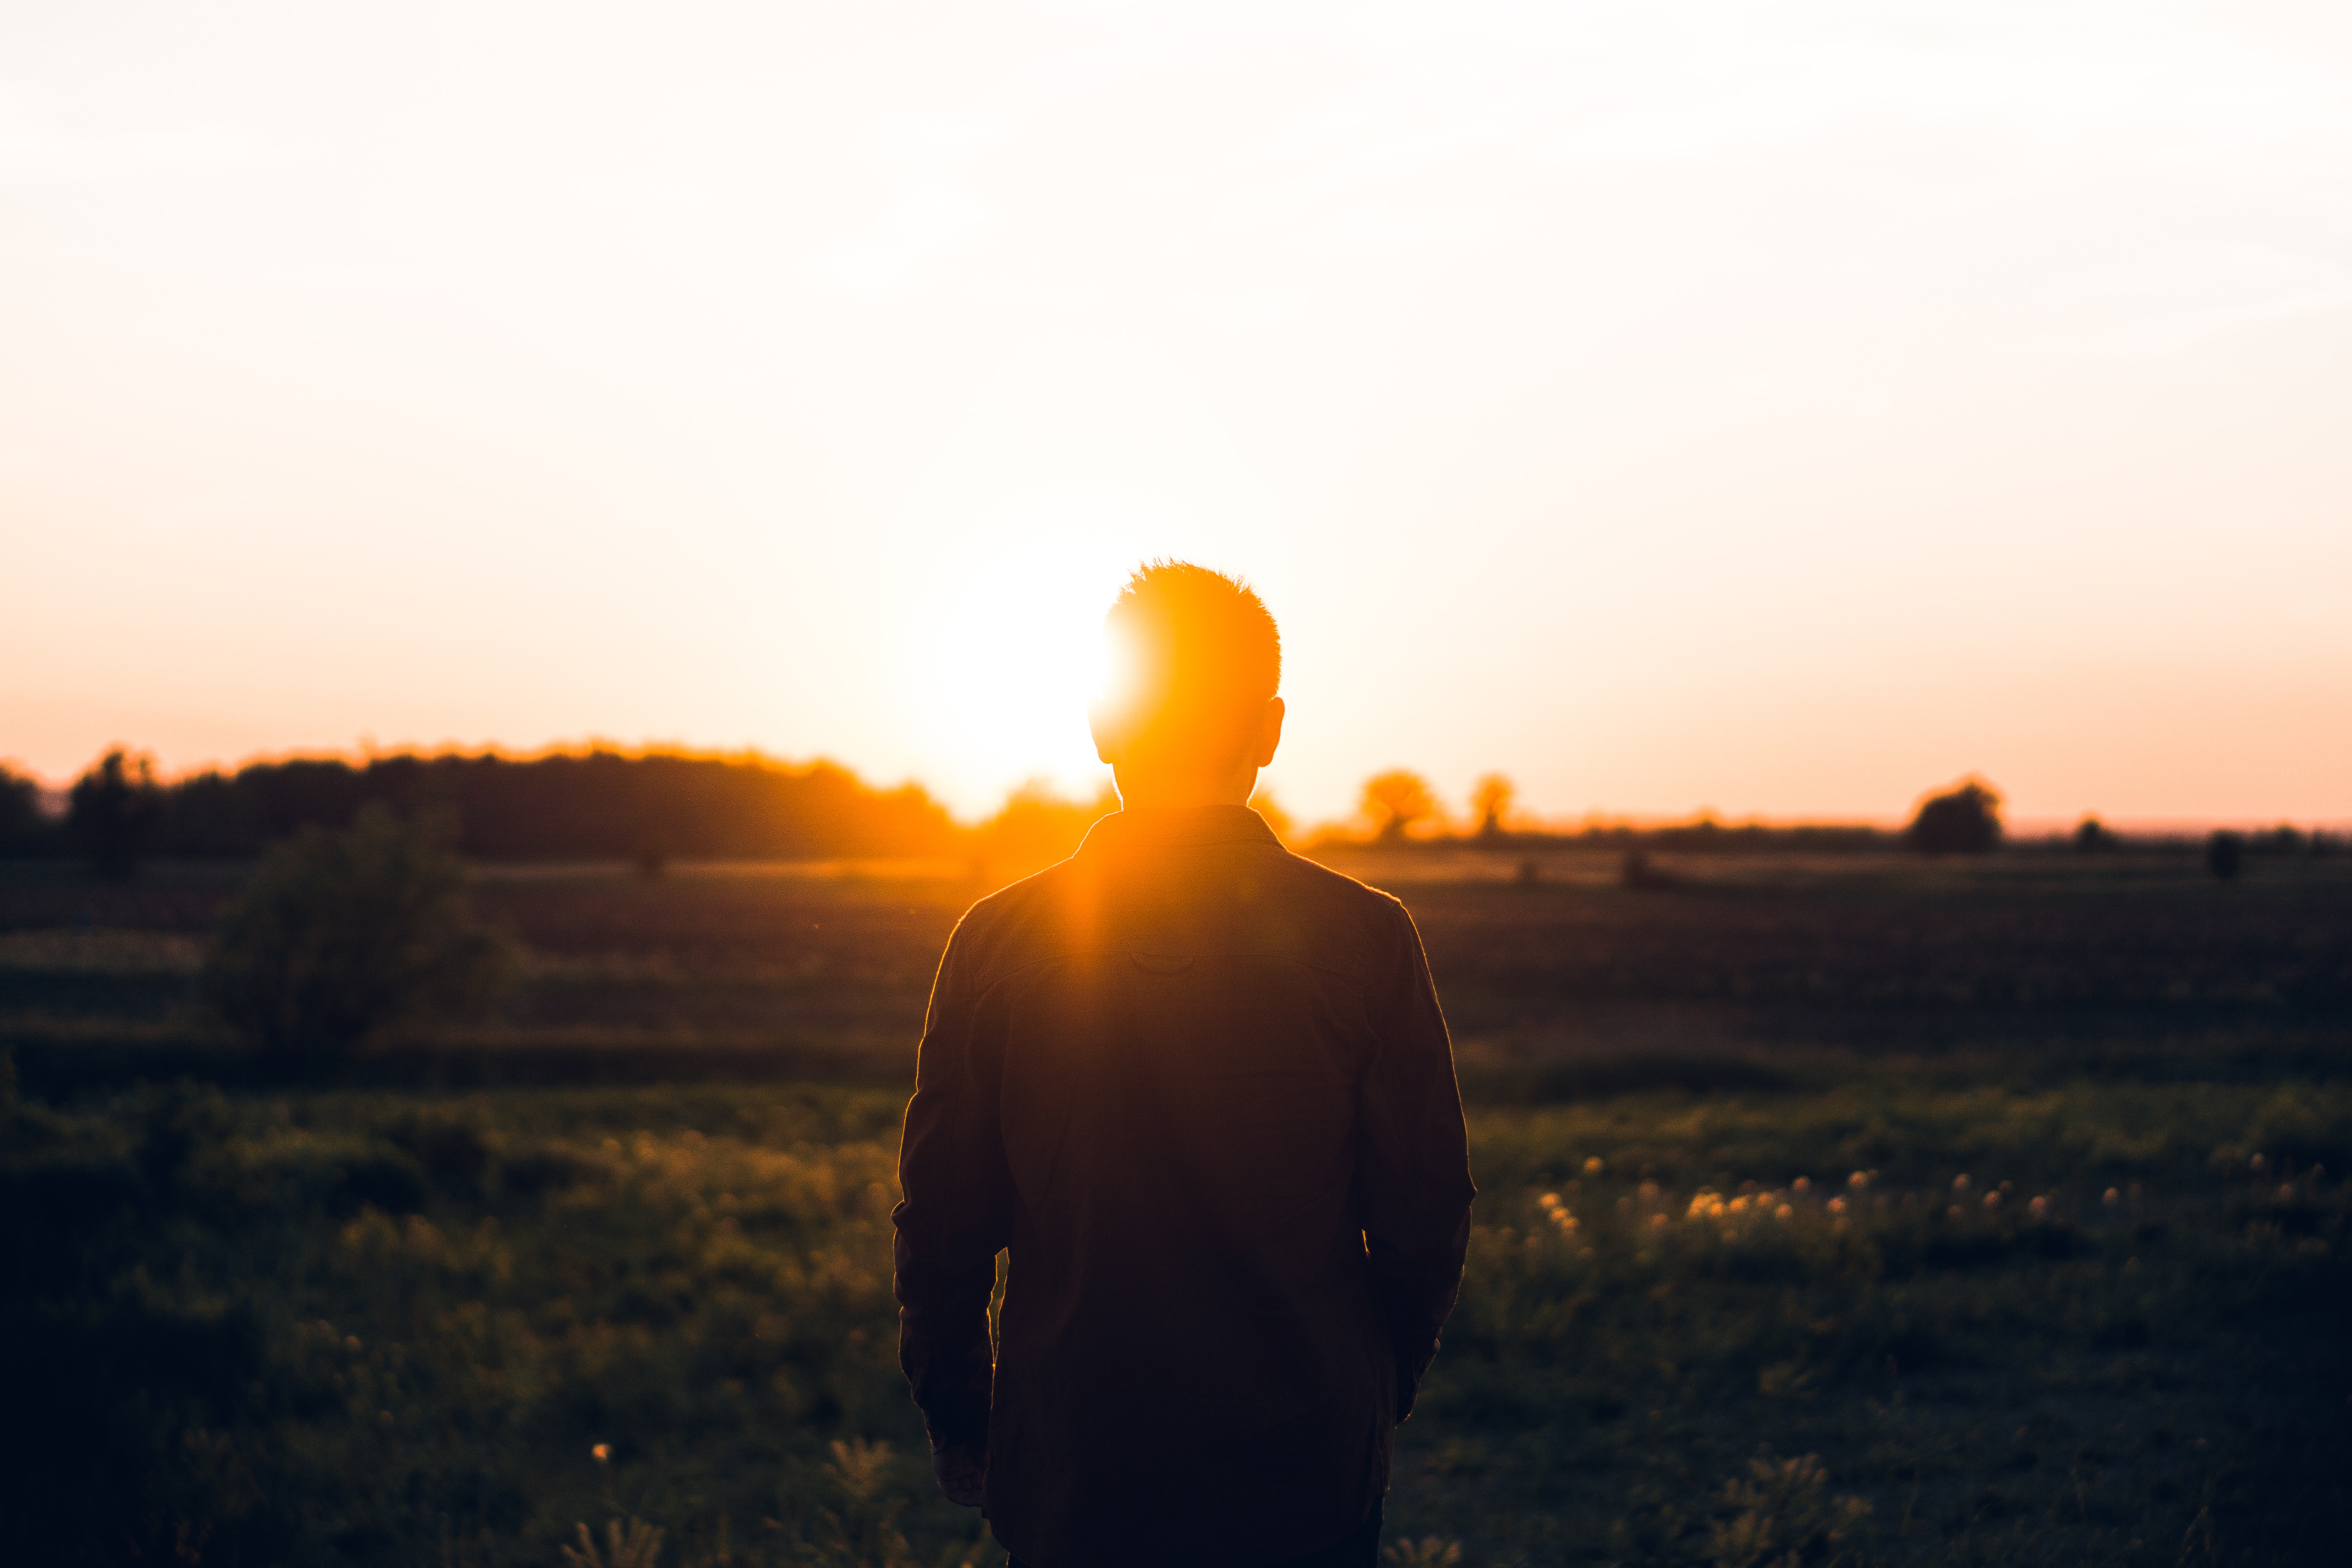 An image of a man, taken from behind, in nature, looking at sunrise